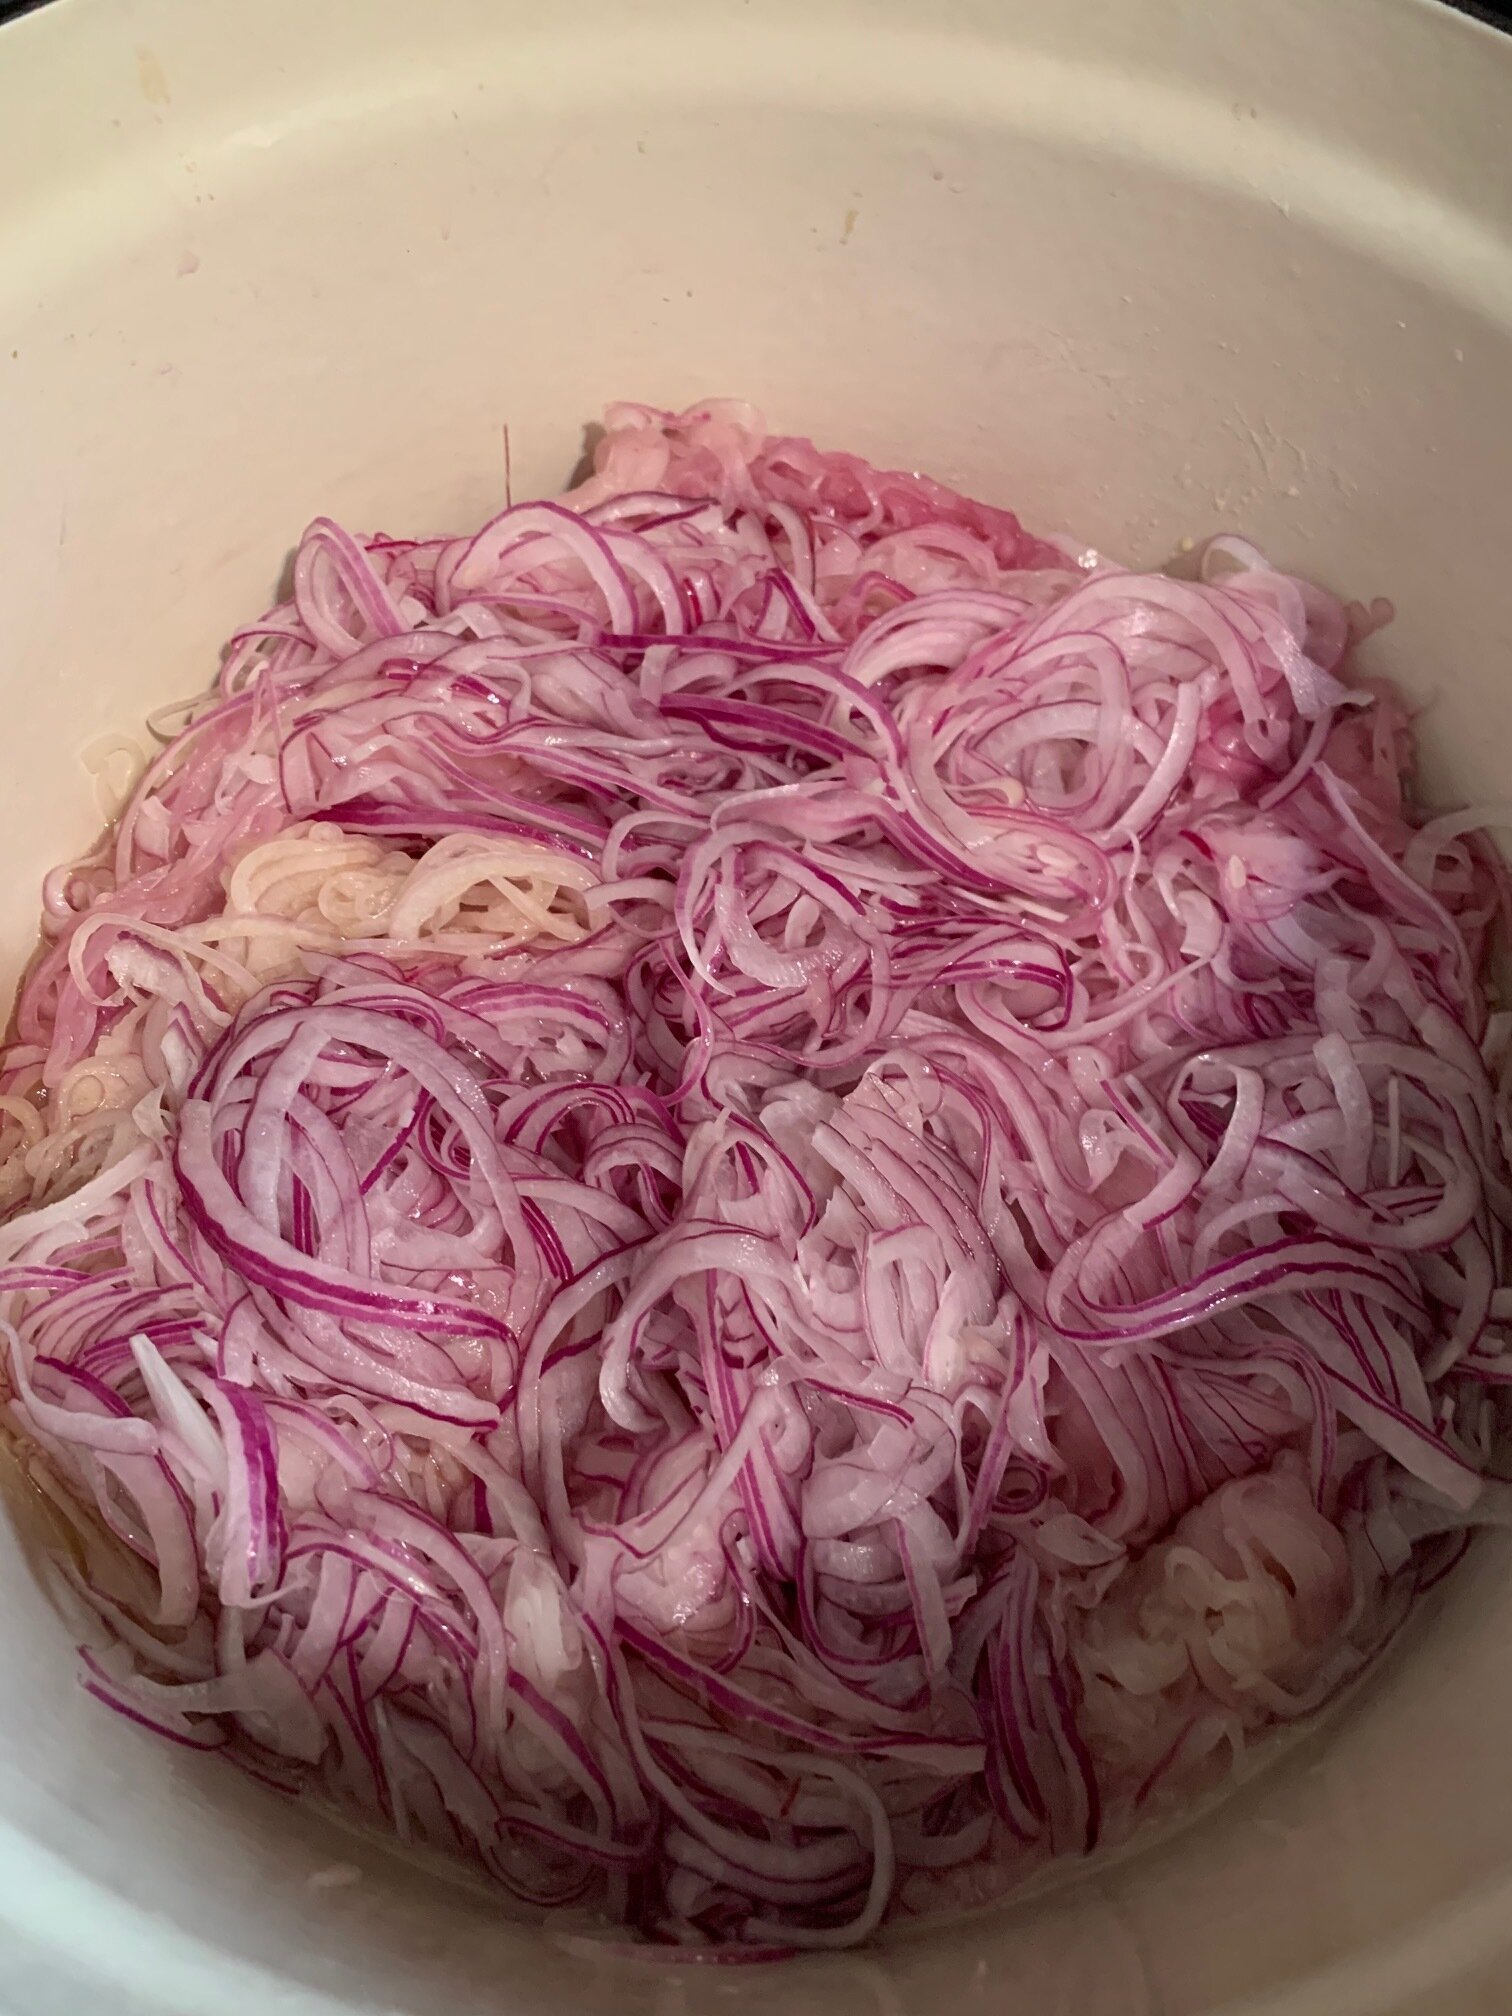 Uncooked onions close up.jpg